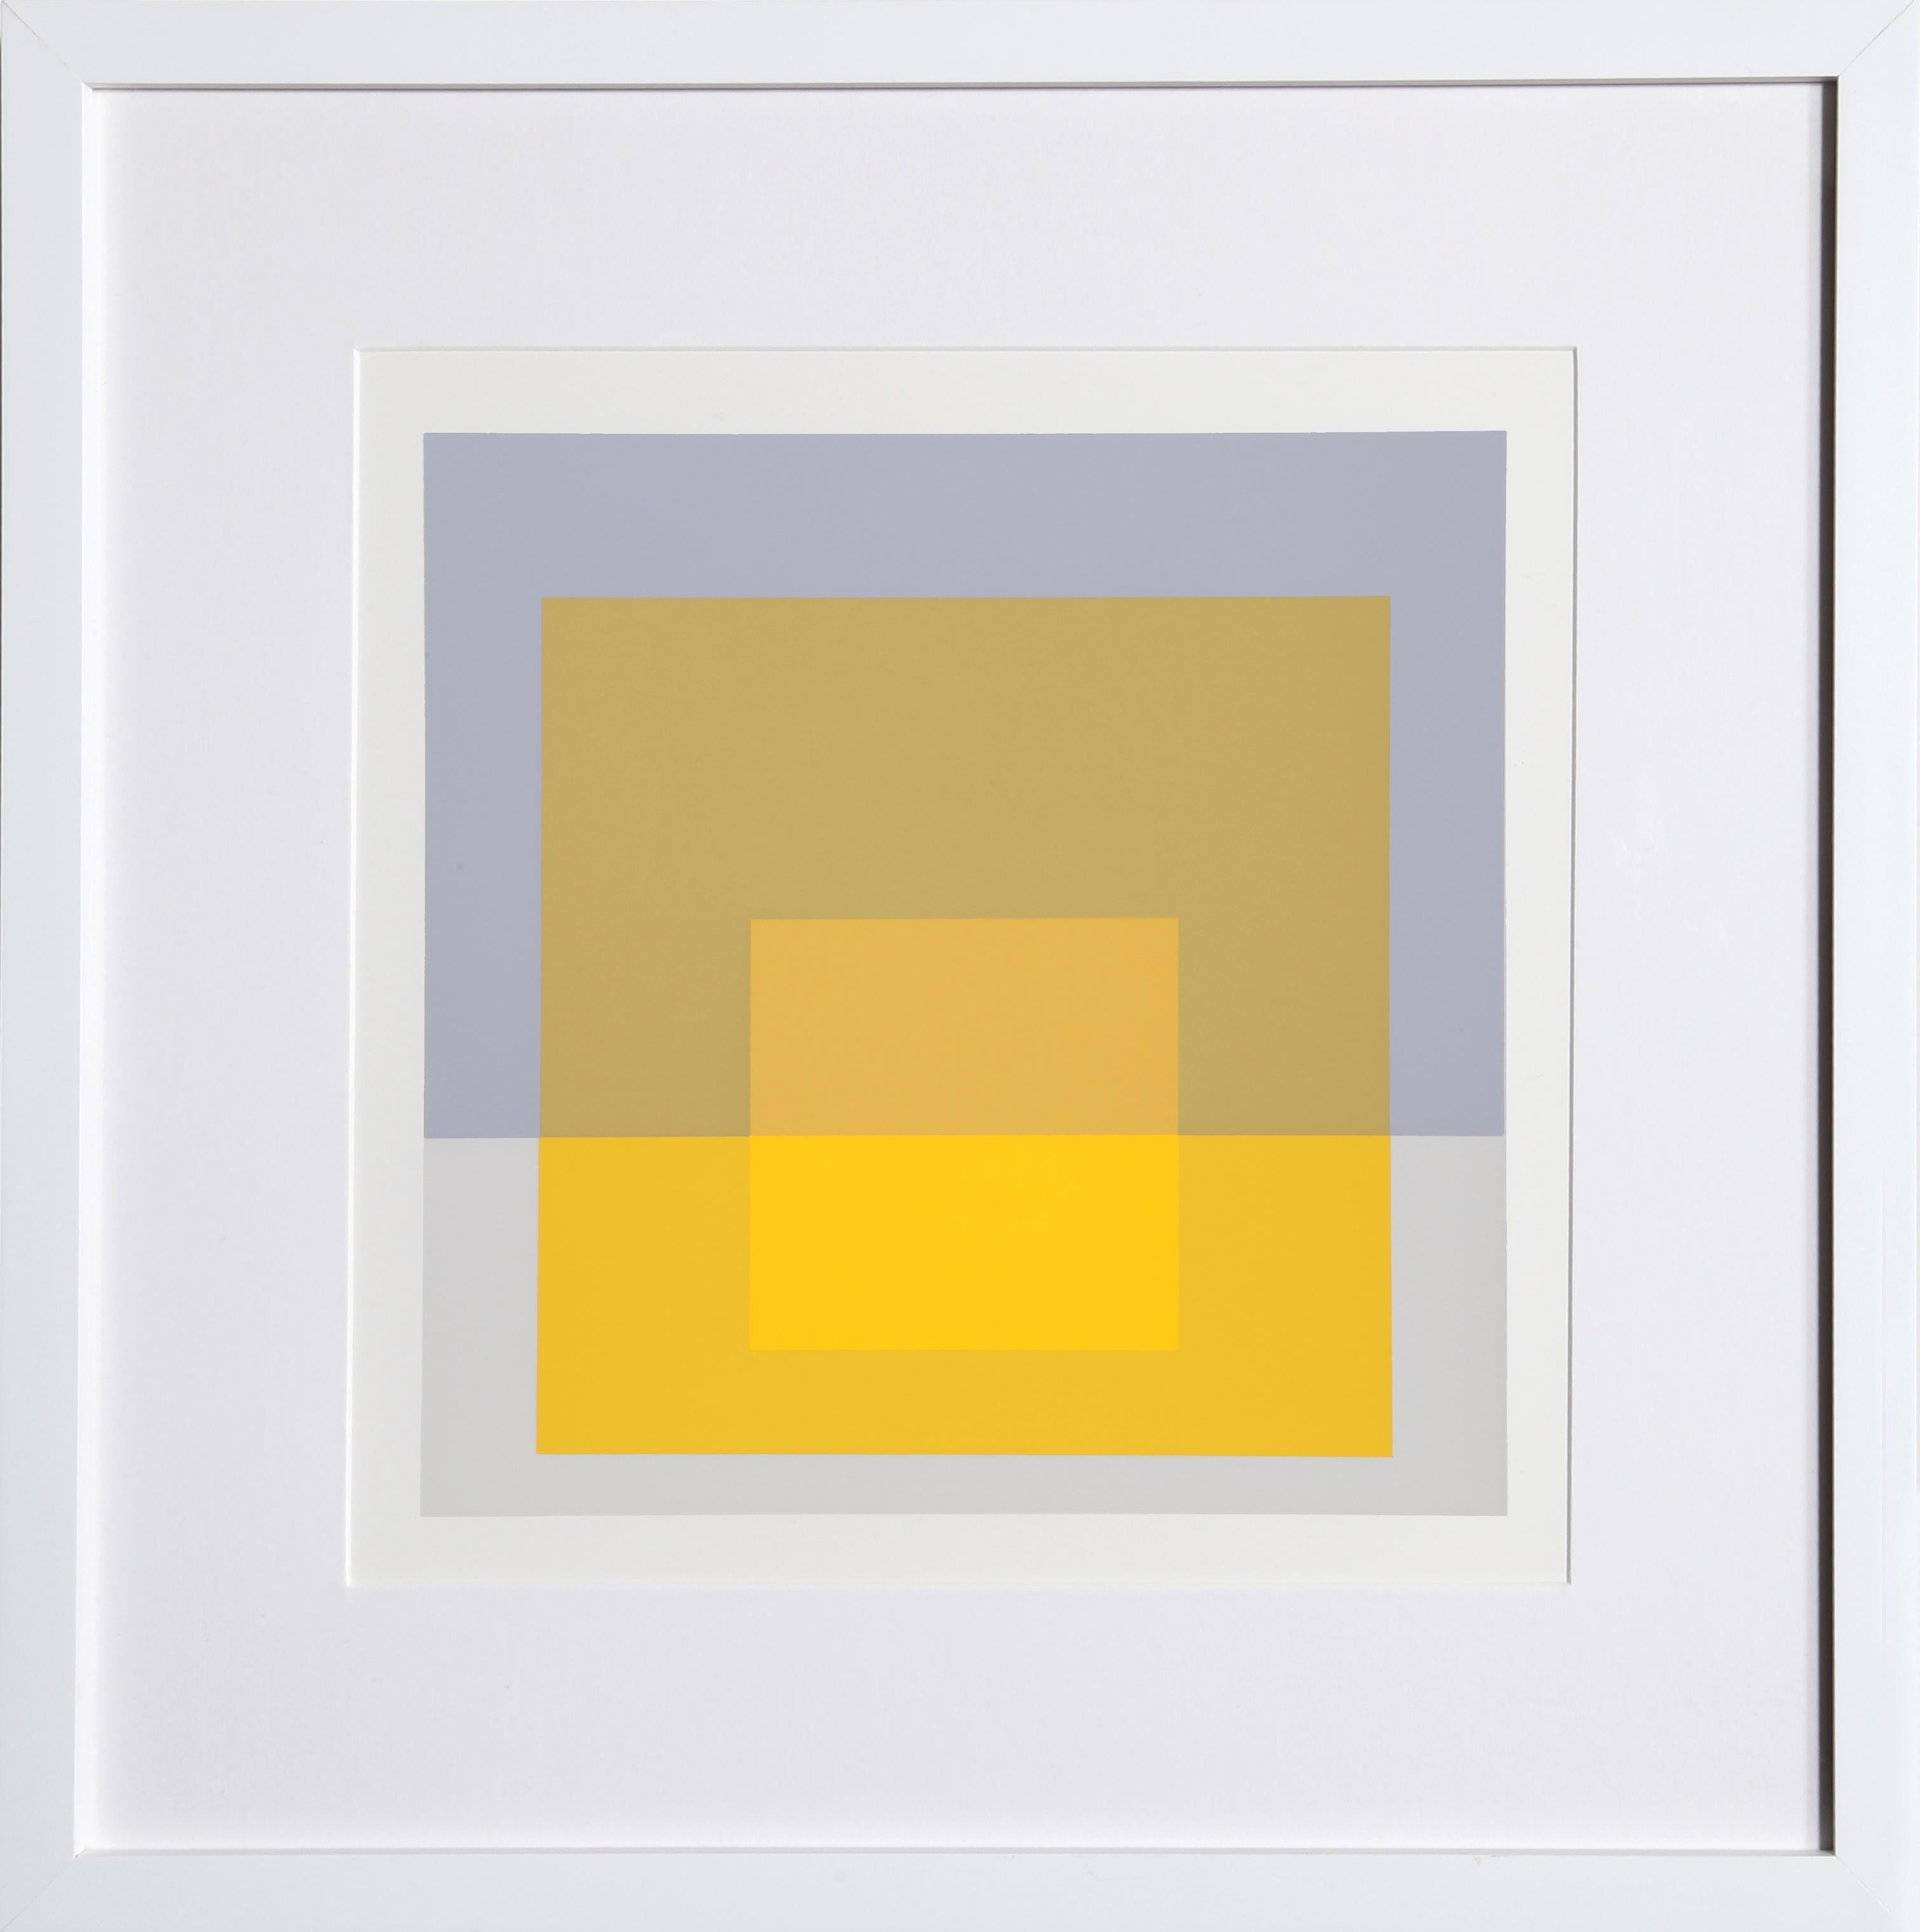 Abstract Print Josef Albers - Hommage au carré - P2, F5, I1